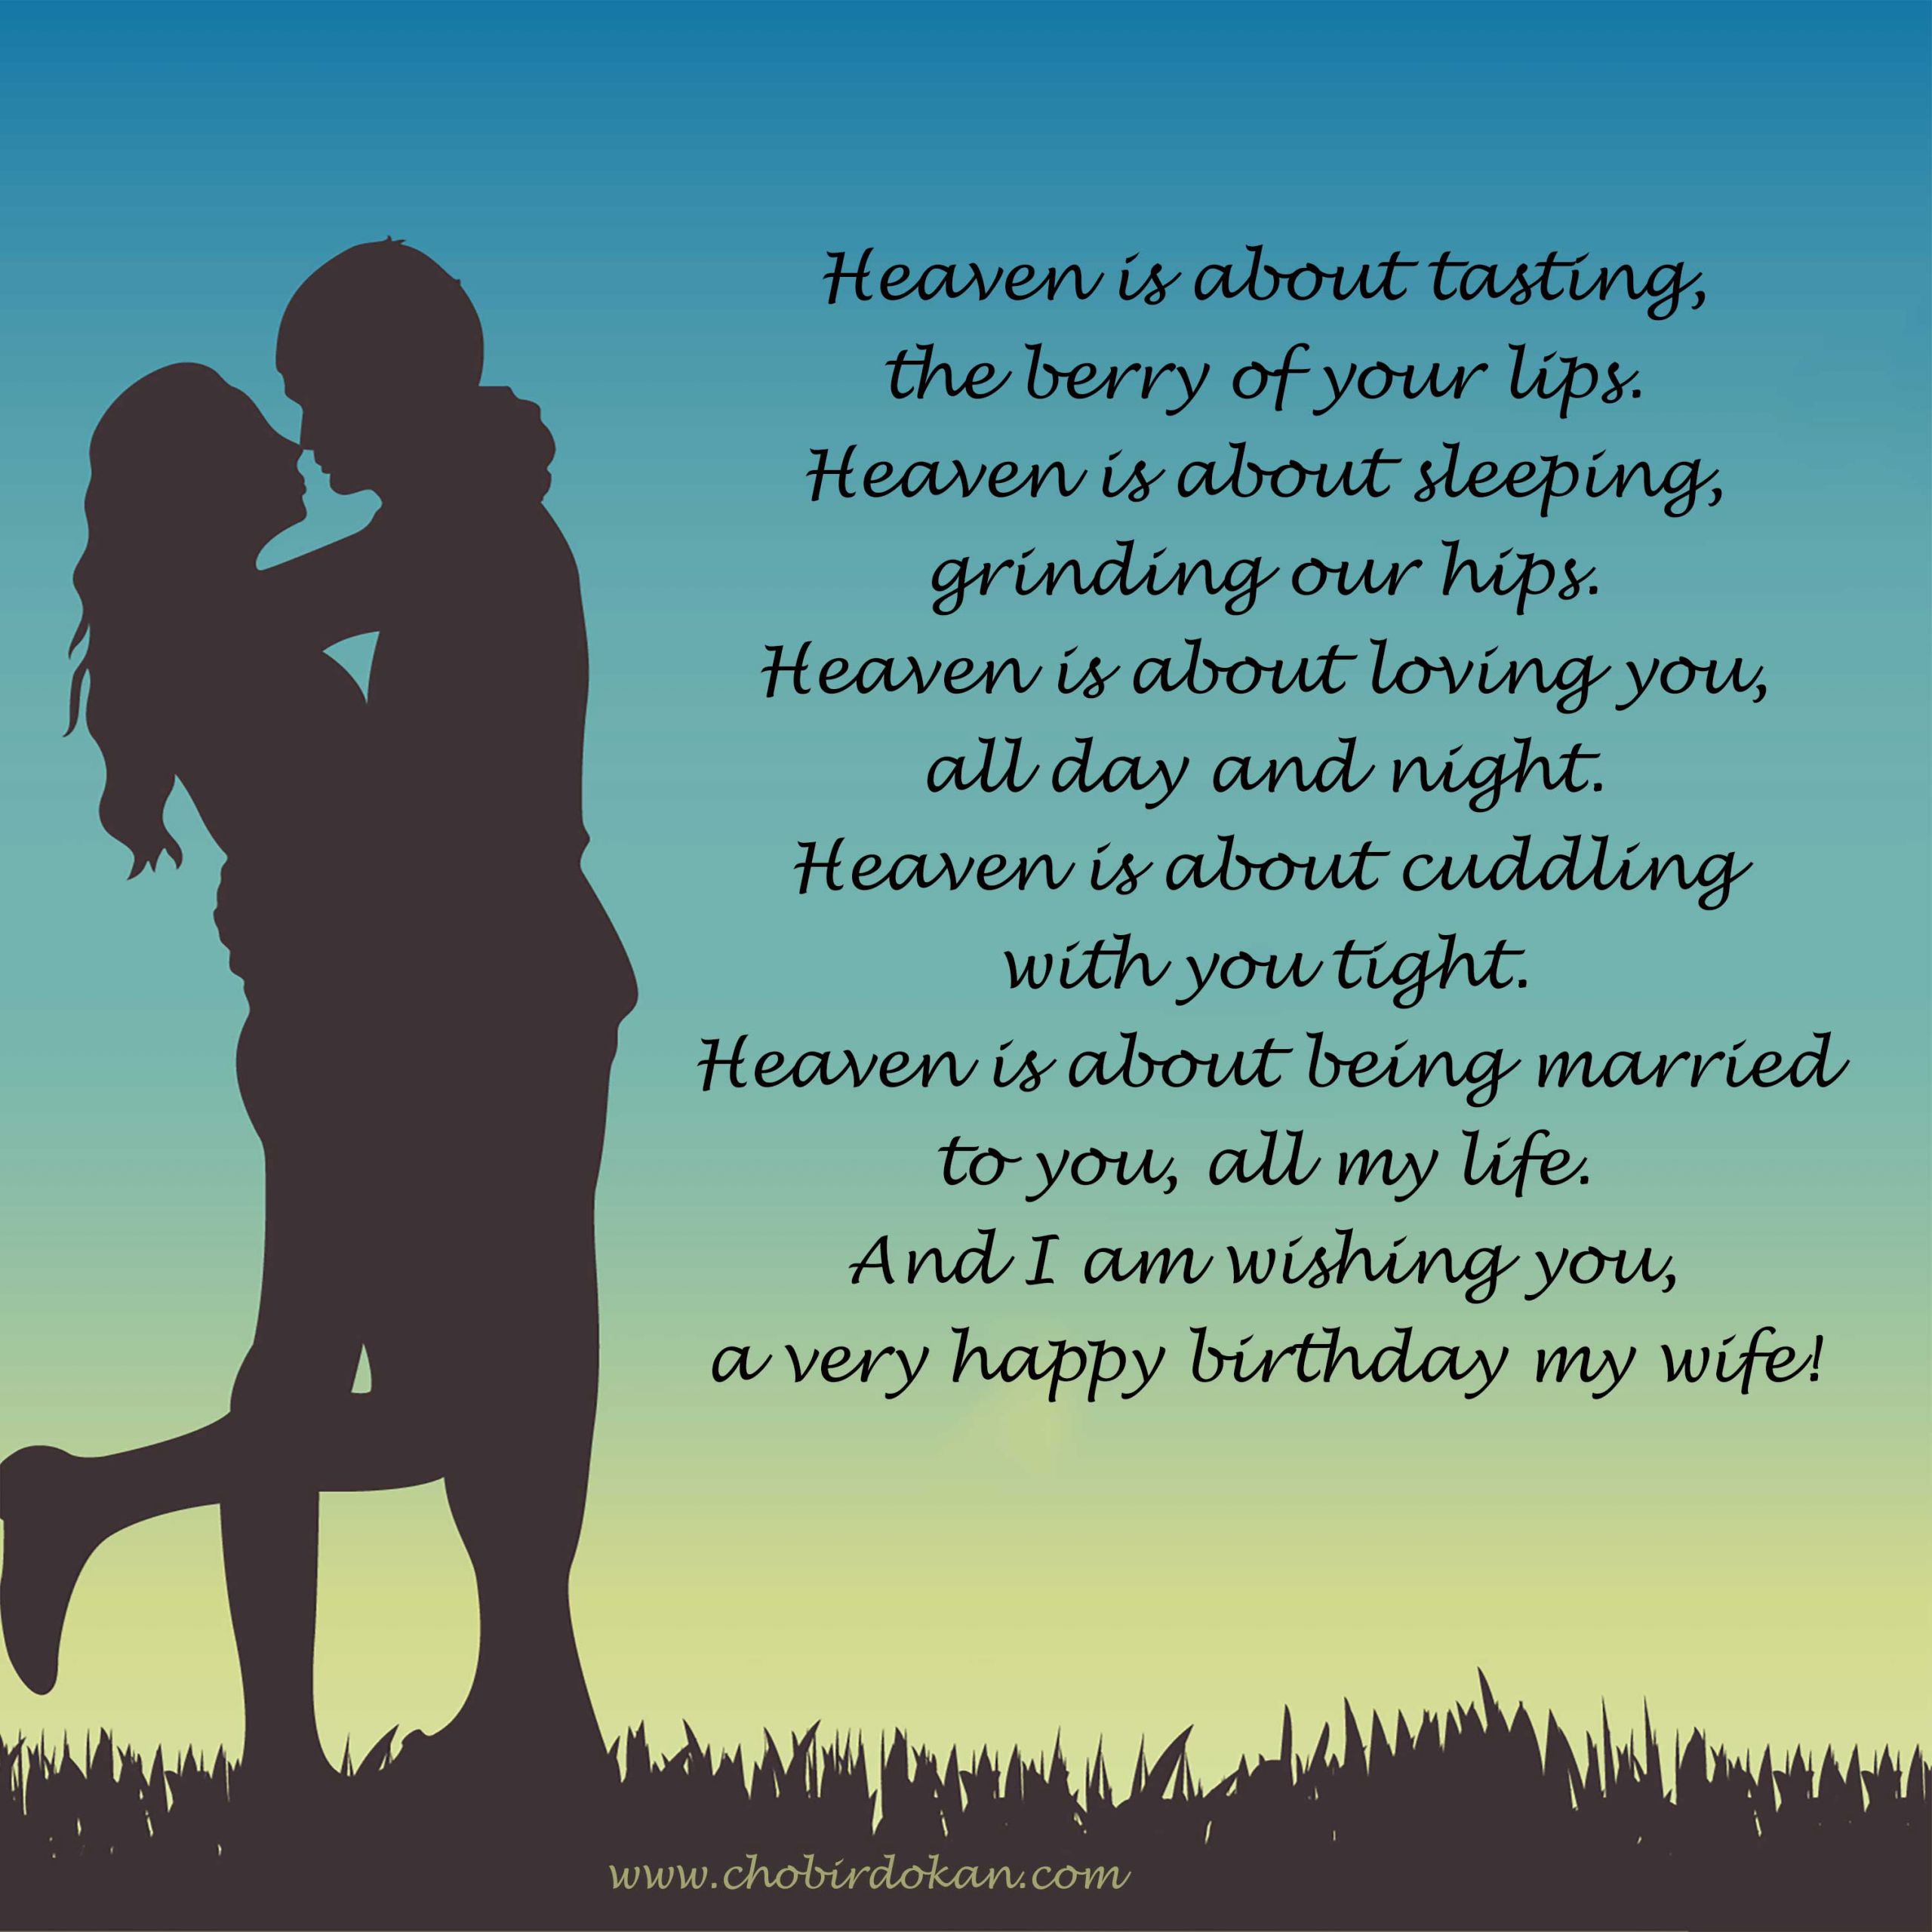 Romantic Birthday Quotes For Girlfriend
 Romantic Happy Birthday Poems For Her For Girlfriend or